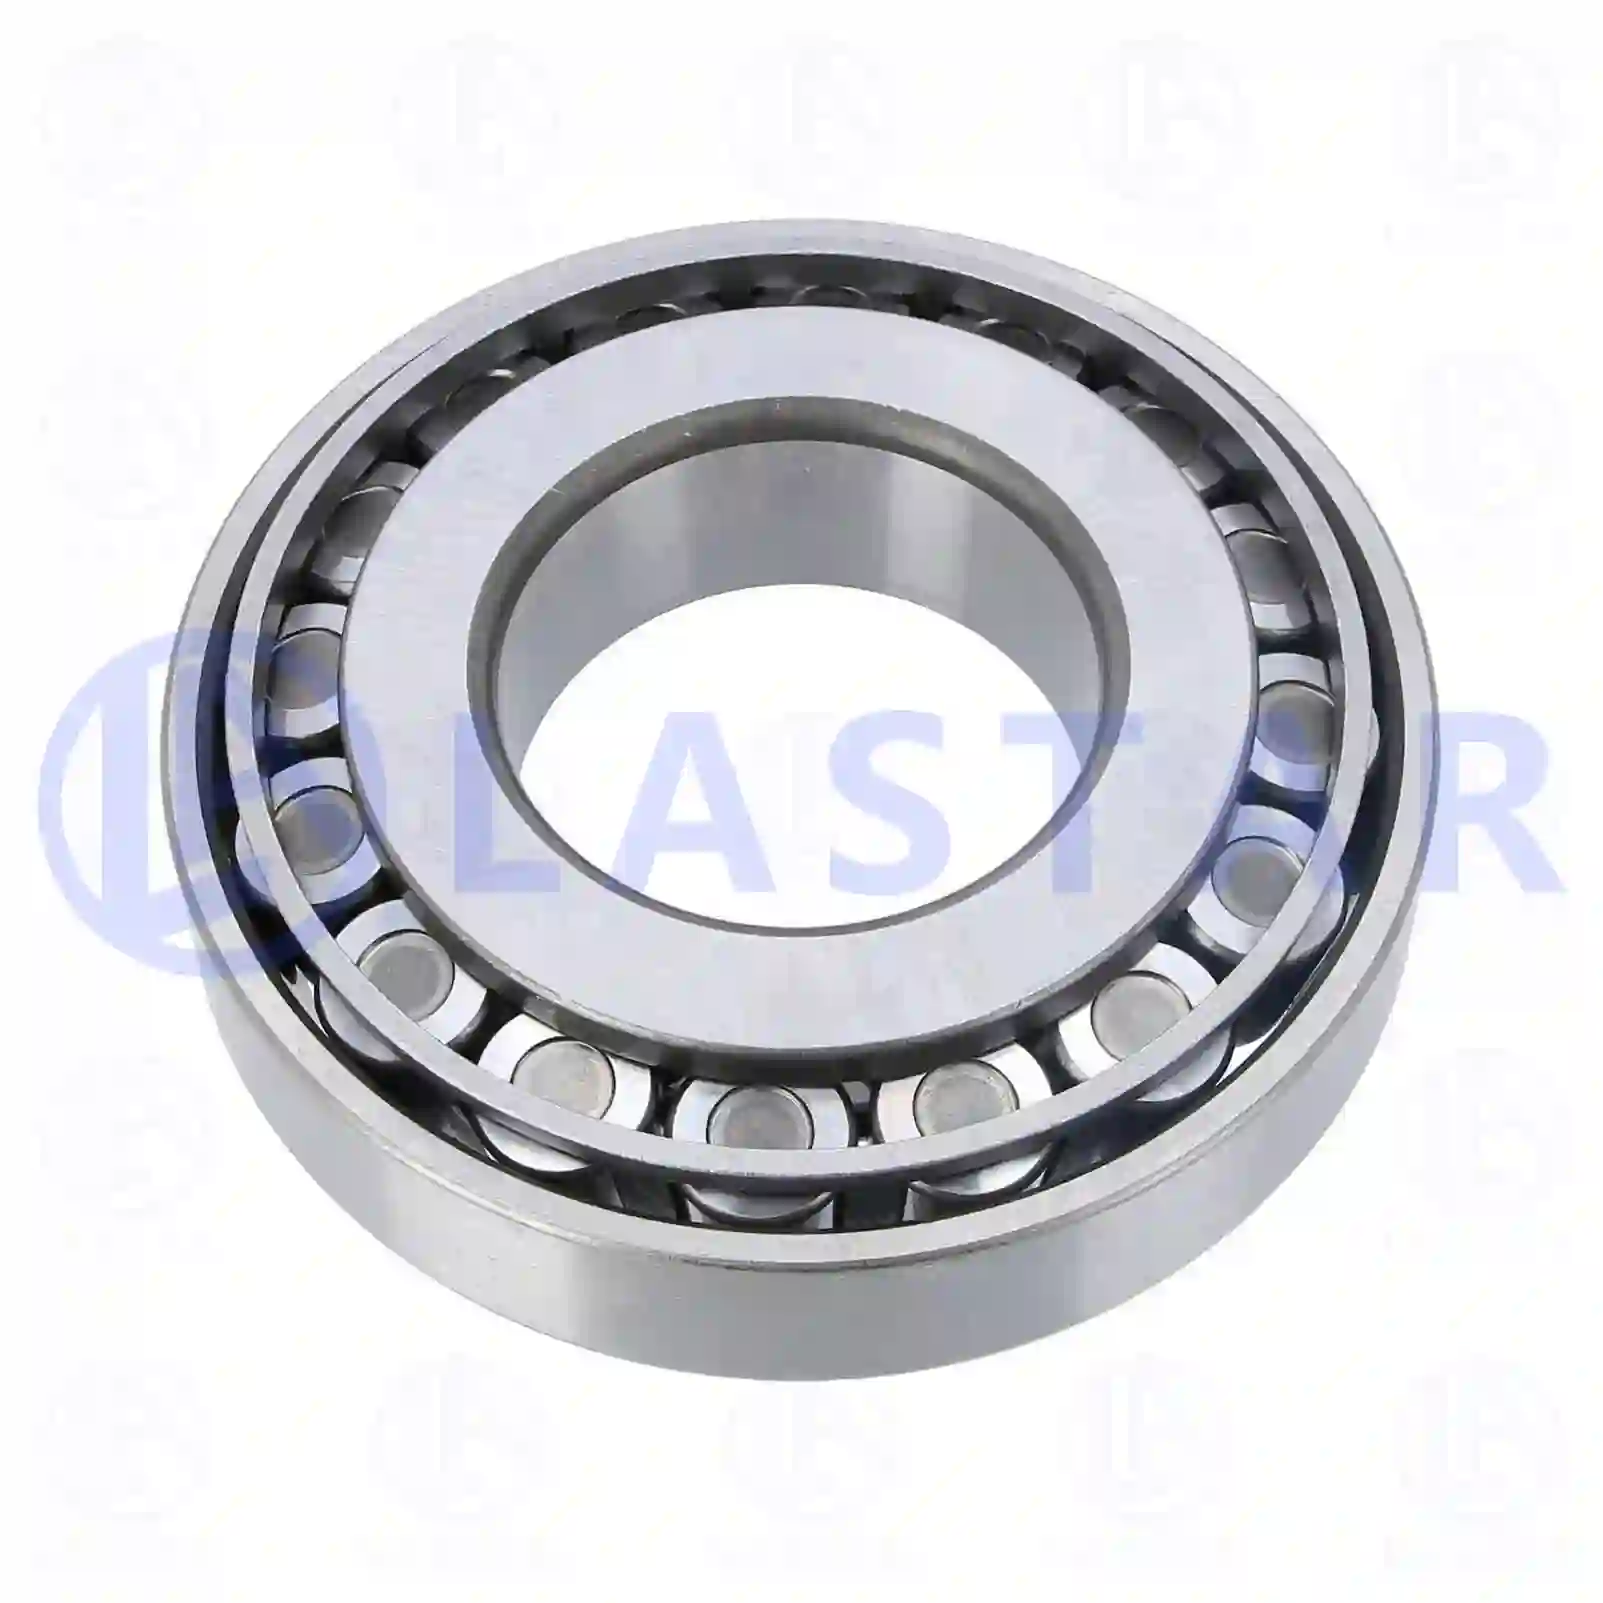 Gearbox Unit Tapered roller bearing, la no: 77731899 ,  oem no:0007200303, 0019811705, 0019817505, 0019817705, 0109817905, 123263, 391289, 1656100 Lastar Spare Part | Truck Spare Parts, Auotomotive Spare Parts